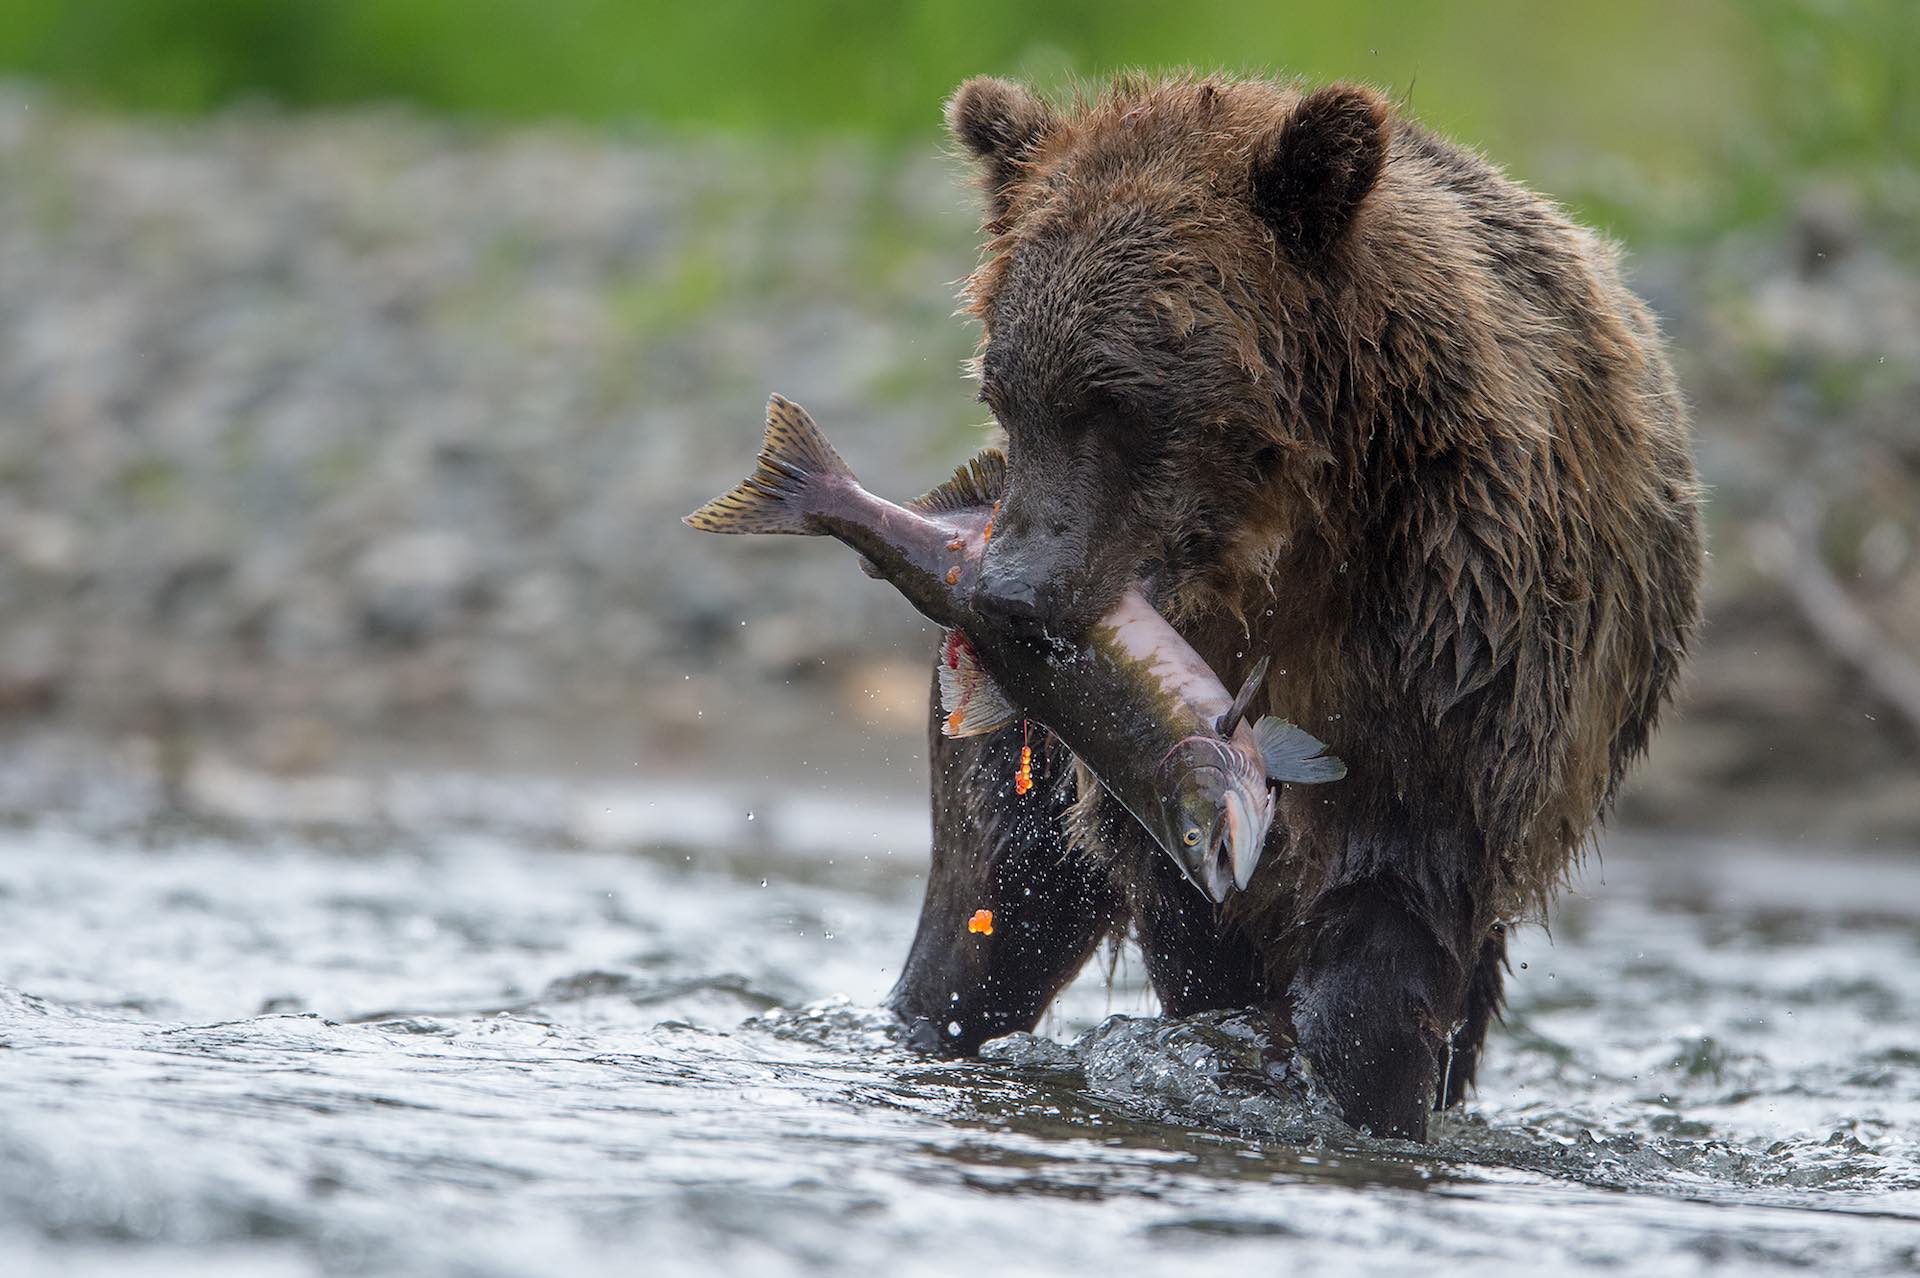 Grizzly bears, wildlife tours, located in the Great Bear Rainforest